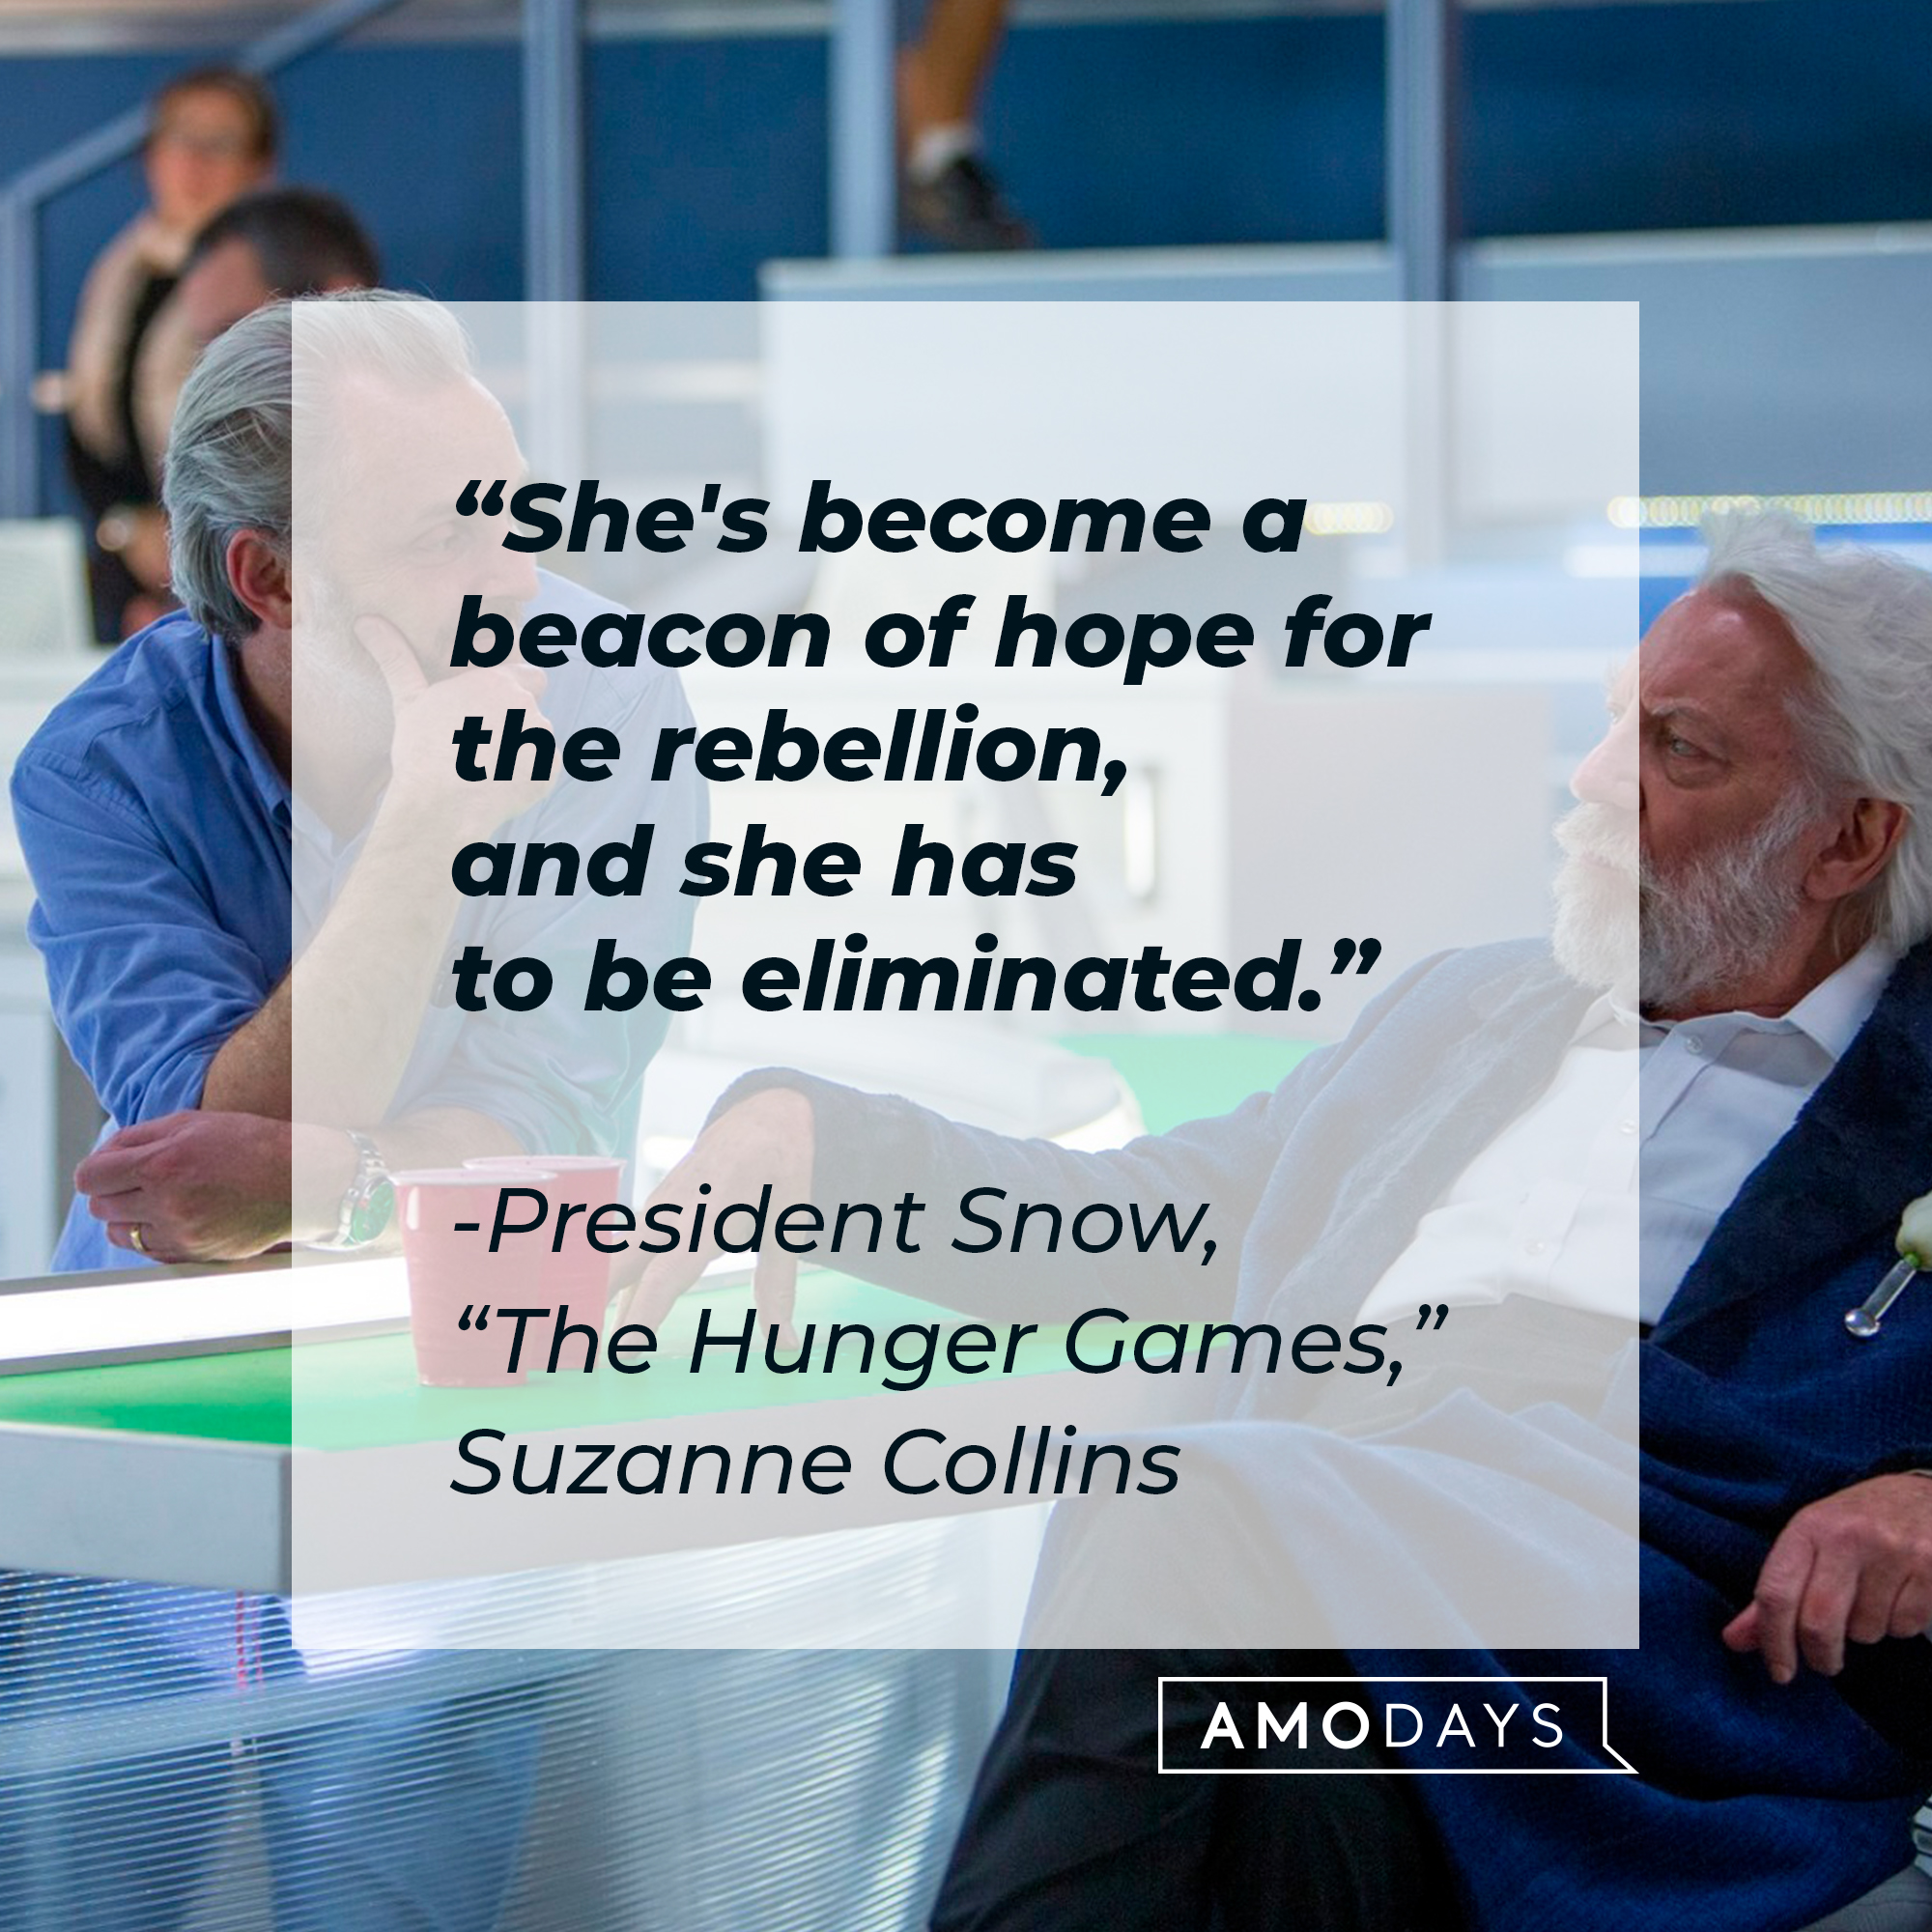 President Snow, with his quote from Suzanne Collins’ “Hunger Games,”: “She's become a beacon of hope for the rebellion, and she has to be eliminated.” | Source: facebook.com/TheHungerGamesMovie